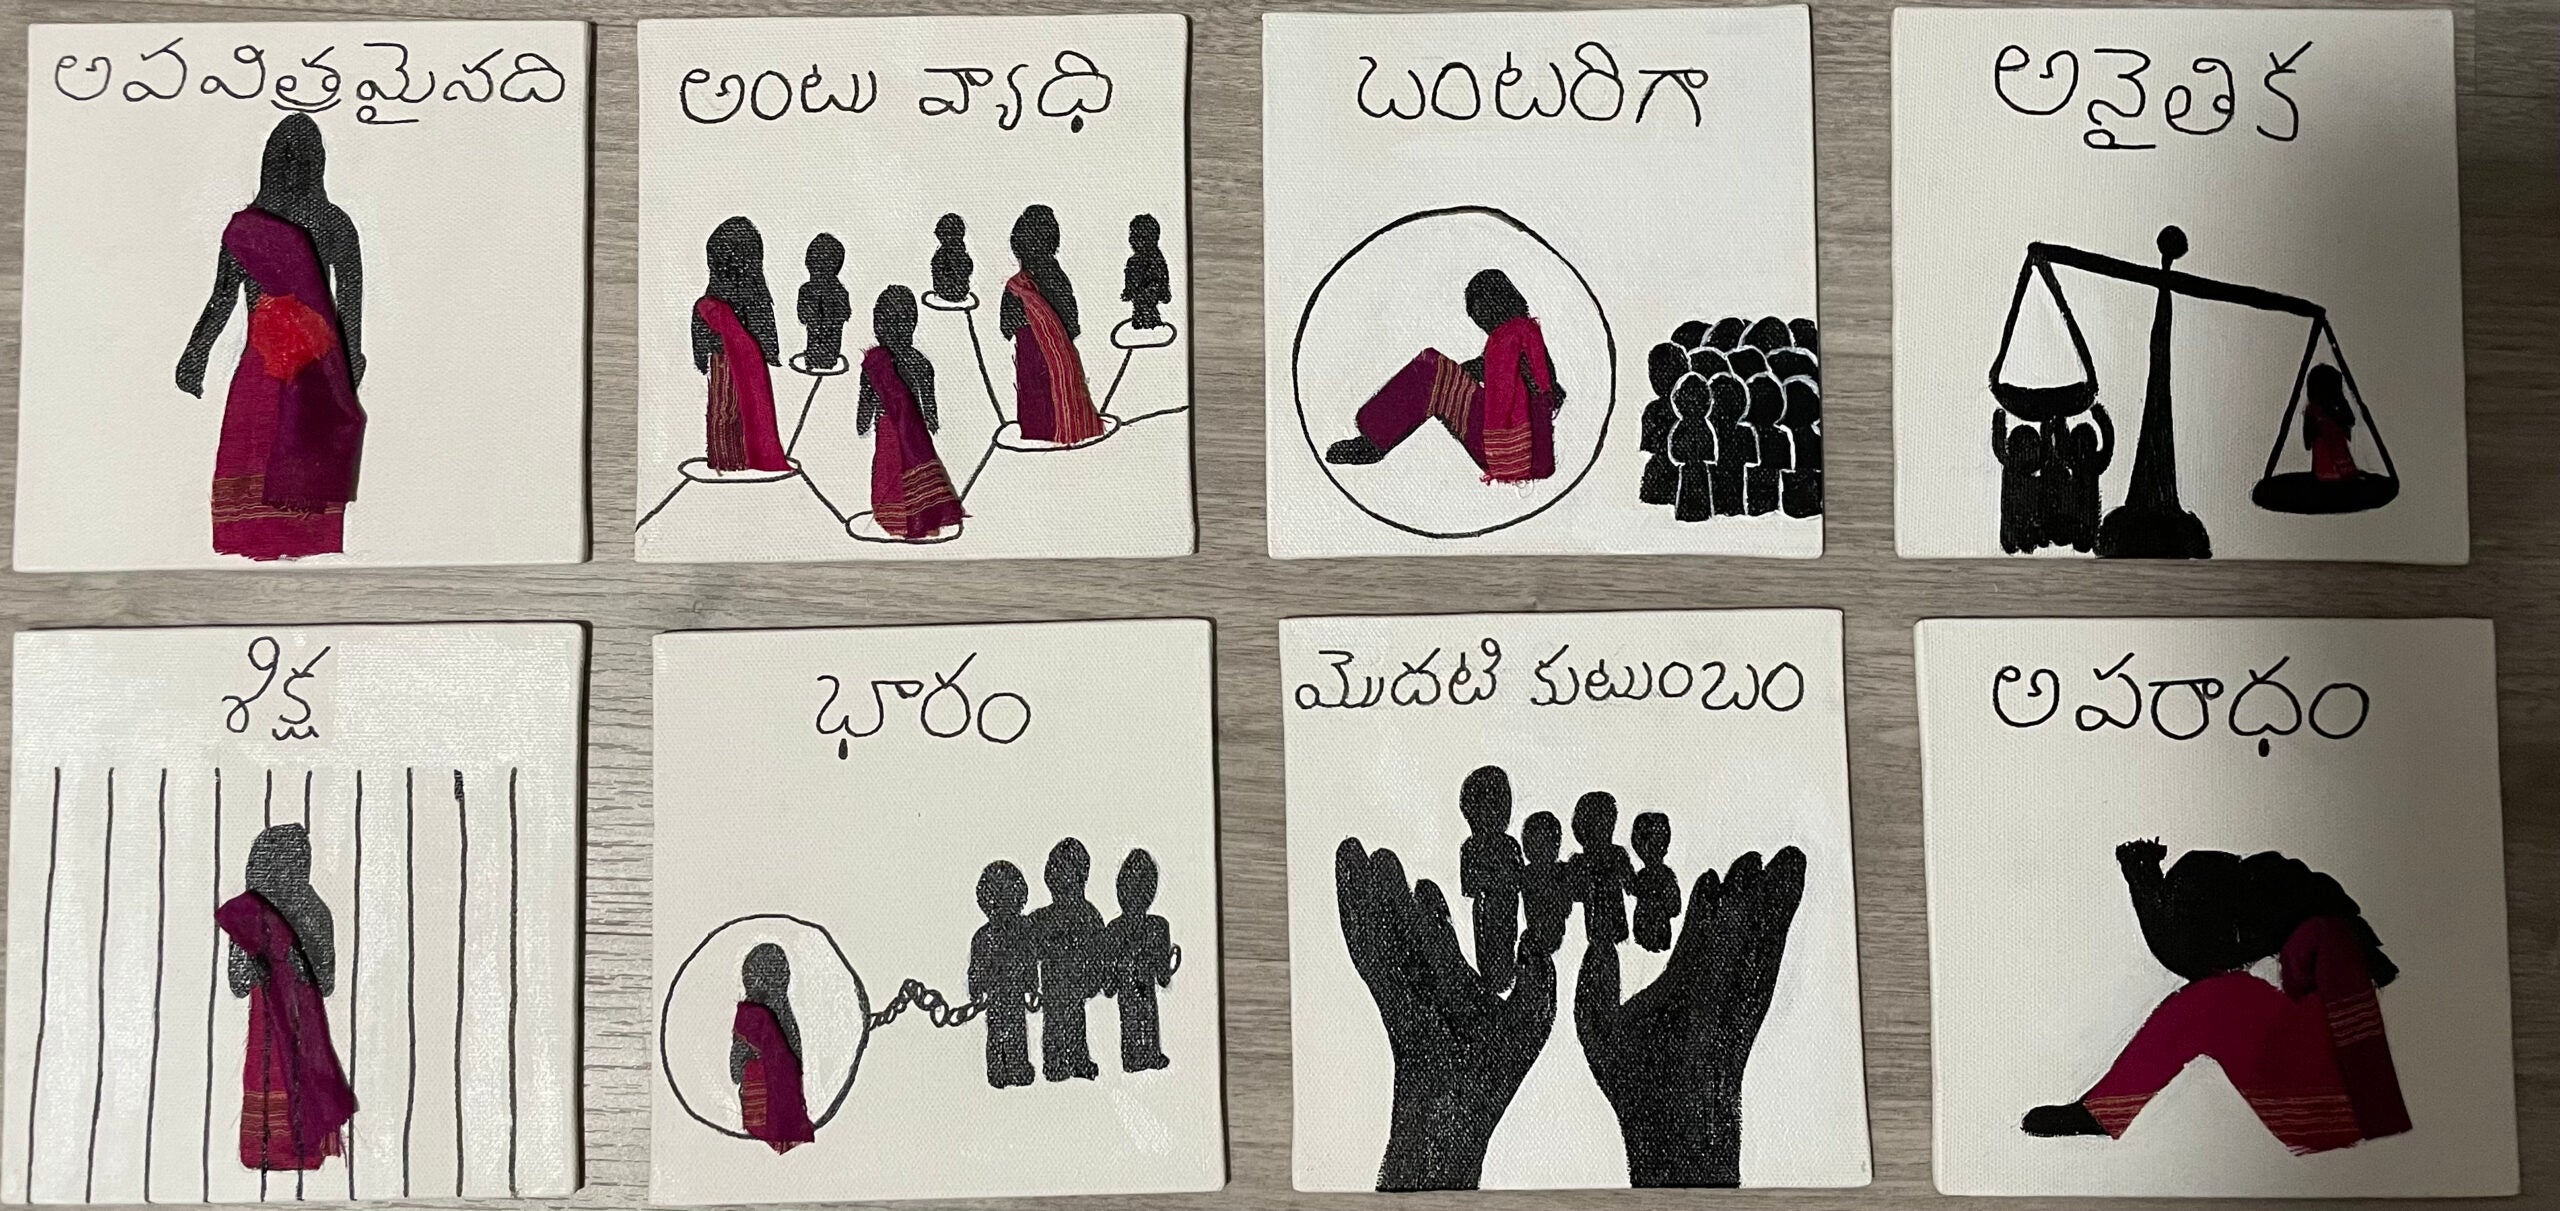 There are eight images displayed, four on the top, and four on the bottom: first: Visual representation of an Indian woman. Her clothing is made of actual fabric. On top of the image, there is a caption in Telugu. Second: Visual representation of a network of people. There are three women, linked to each other, and each of them is also linked to a dark silhouette. The women's clothing is made of actual fabric. On top of the image, there is a caption in Telugu. Third: Visual representation of an Indian woman trapped in a circle, while the silhouettes of a large group of people are standing next to her (maybe staring at her and judging her). Her clothing is made of actual fabric. On top of the image, there is a caption in Telugu. Fourth: Visual representation of a balance scale weighting an Indian woman, on the right, and a group of silhouettes of a group of people, on the left. She seems to weight more than them, but they seem to try to pull the balance plate towards them. Her clothing is made of actual fabric. On top of the image, there is a caption in Telugu. Fifth: Visual representation of an Indian woman trapped behind bars. Her clothing is made of actual fabric. On top of the image, there is a caption in Telugu. Sixth: Visual representation of an Indian woman trapped in a circle, chained to the silhouettes of a group of people. Her clothing is made of actual fabric. On top of the image, there is a caption in Telugu. Seventh: Visual representation of the silhouettes of a group of people. In front of them, there are open arms, as if they were asking something from them. On top of the image, there is a caption in Telugu. Eight: Visual representation of an Indian woman sitting on the flood, with her head on her knees and folding her arms (her pose suggests pain and desperation, maybe she is praying). Her clothing is made of actual fabric. On top of the image, there is a caption in Telugu